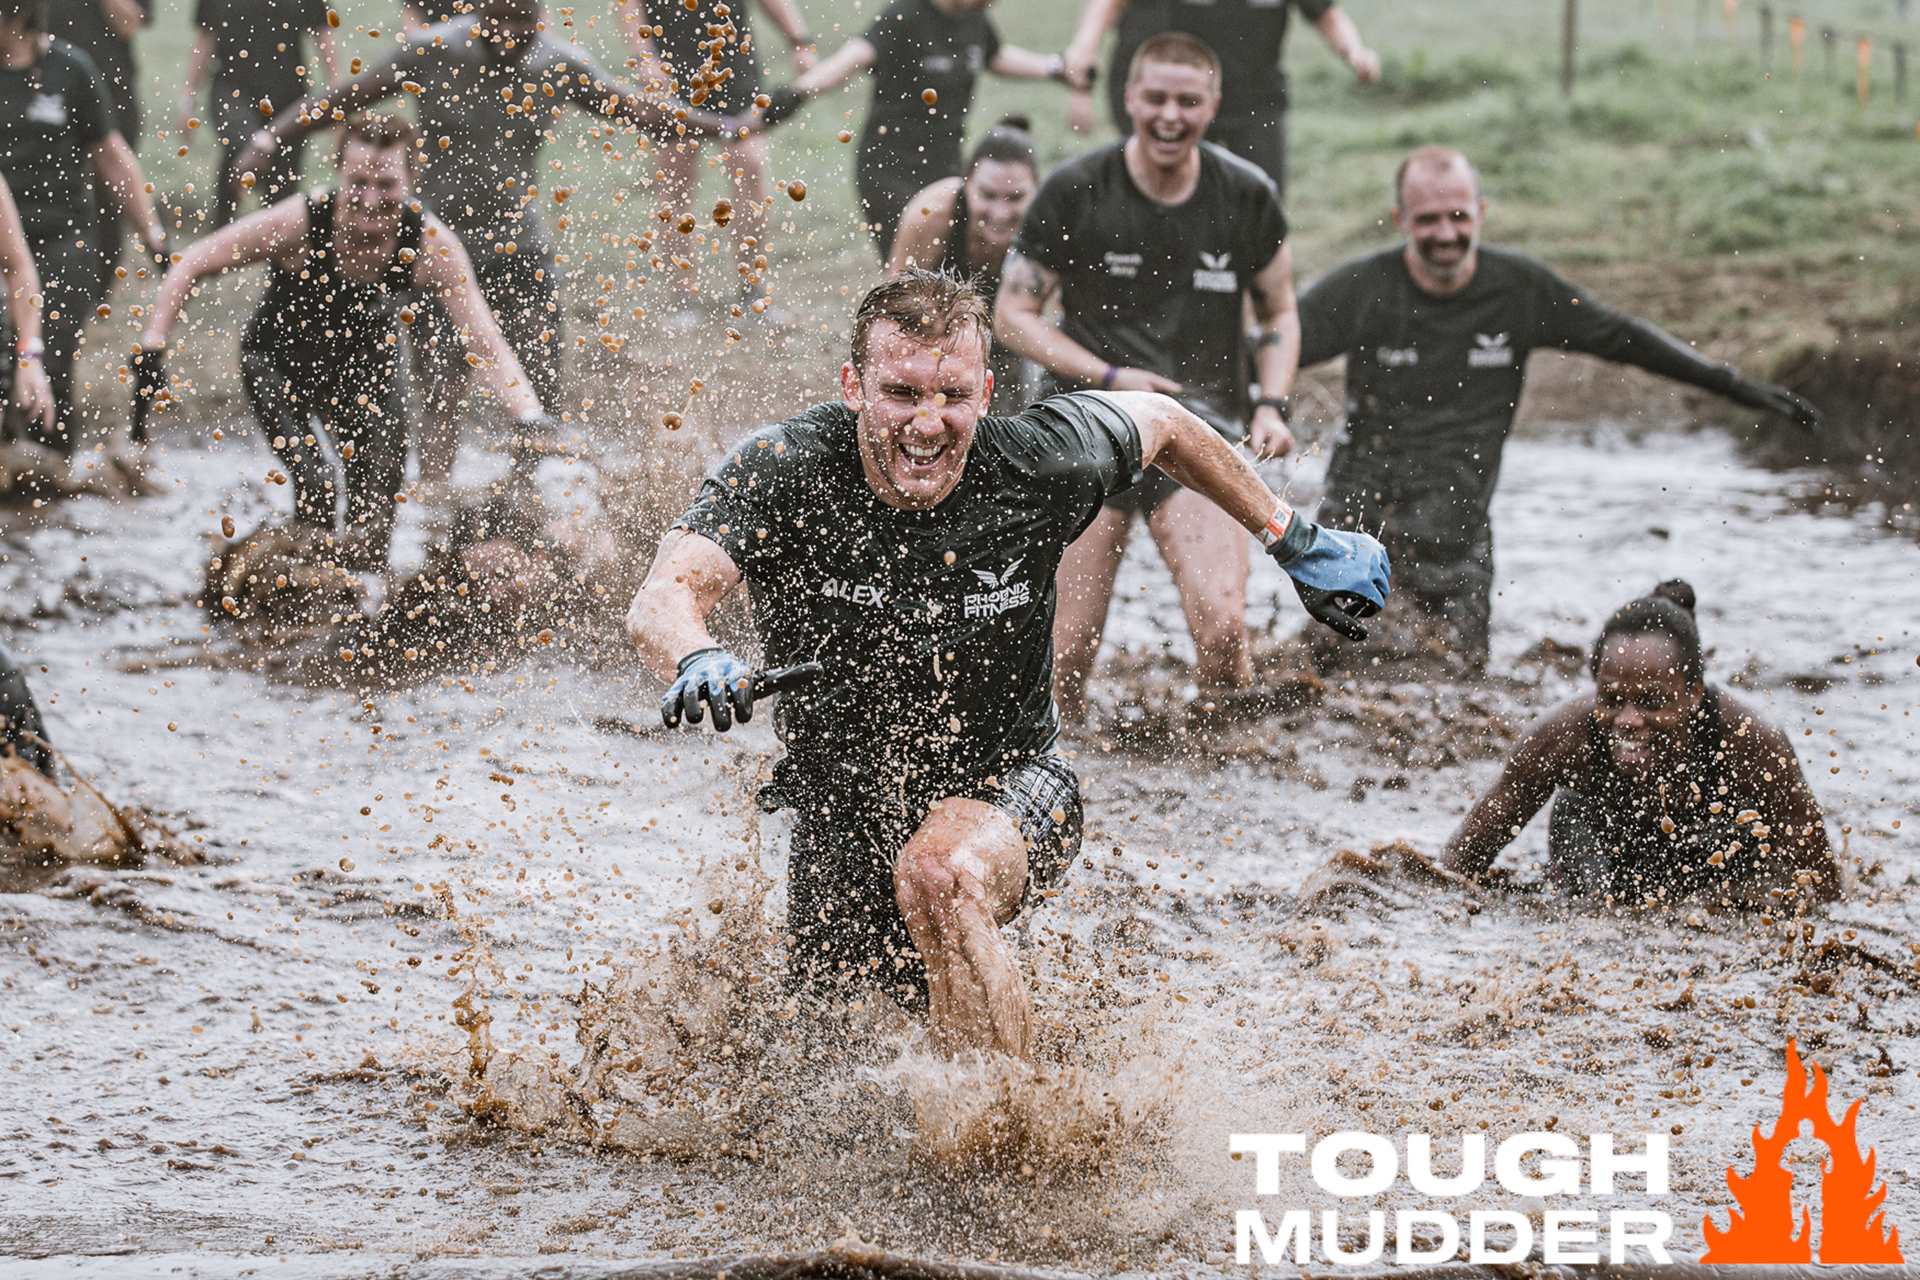 Tough Mudder participants running through mud and laughing